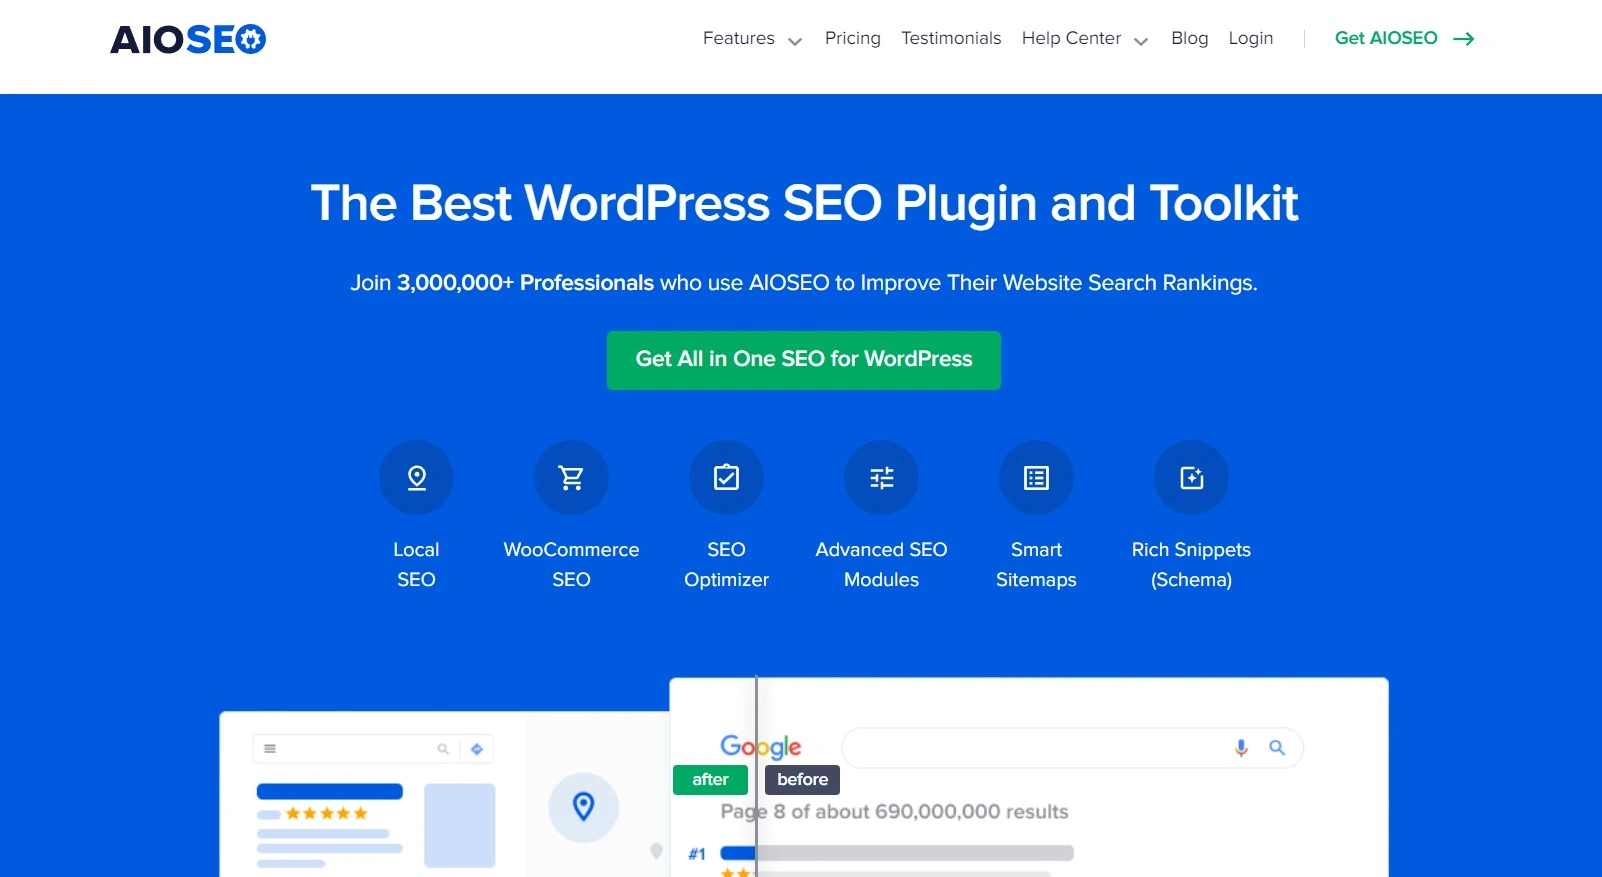 All in One SEO Pack wp seo plugin and toolkit